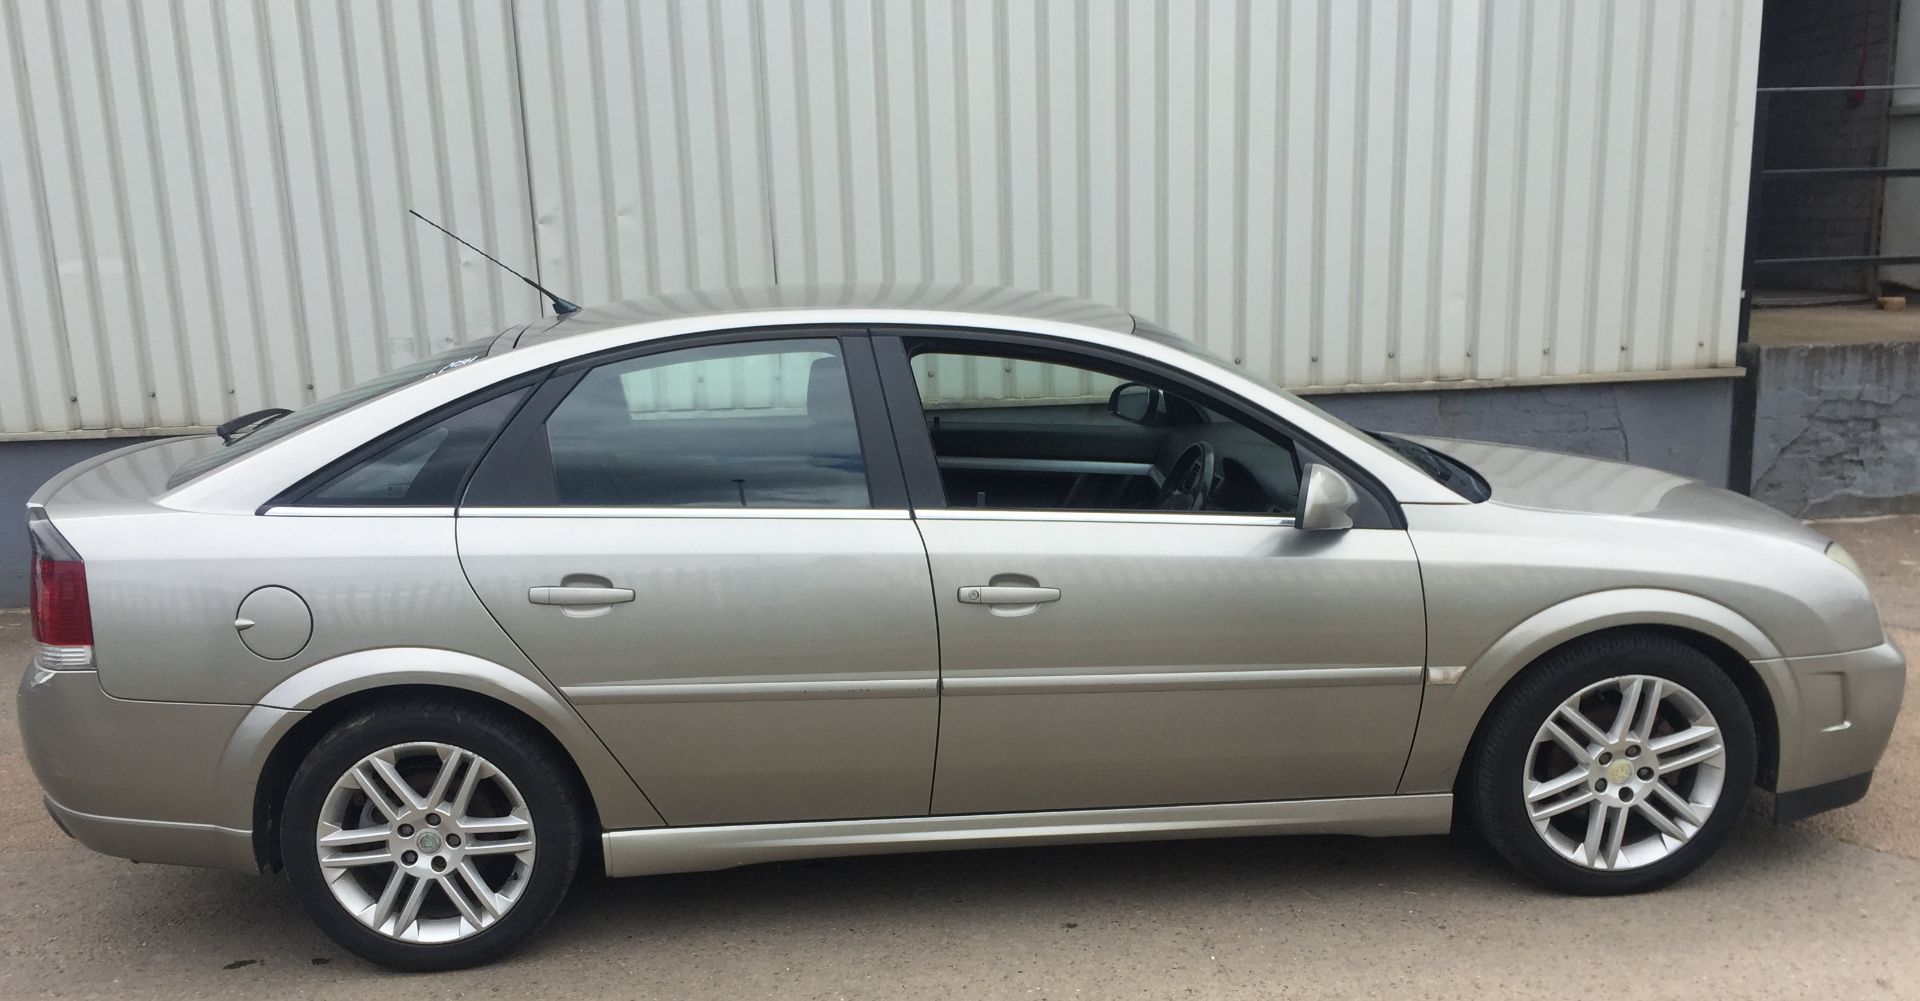 2004 Vauxhall Vectra 2.2 Sri Automatic 4 Dr Saloon - CL505 - NO VAT ON THE HAMMER - Location: - Image 2 of 7